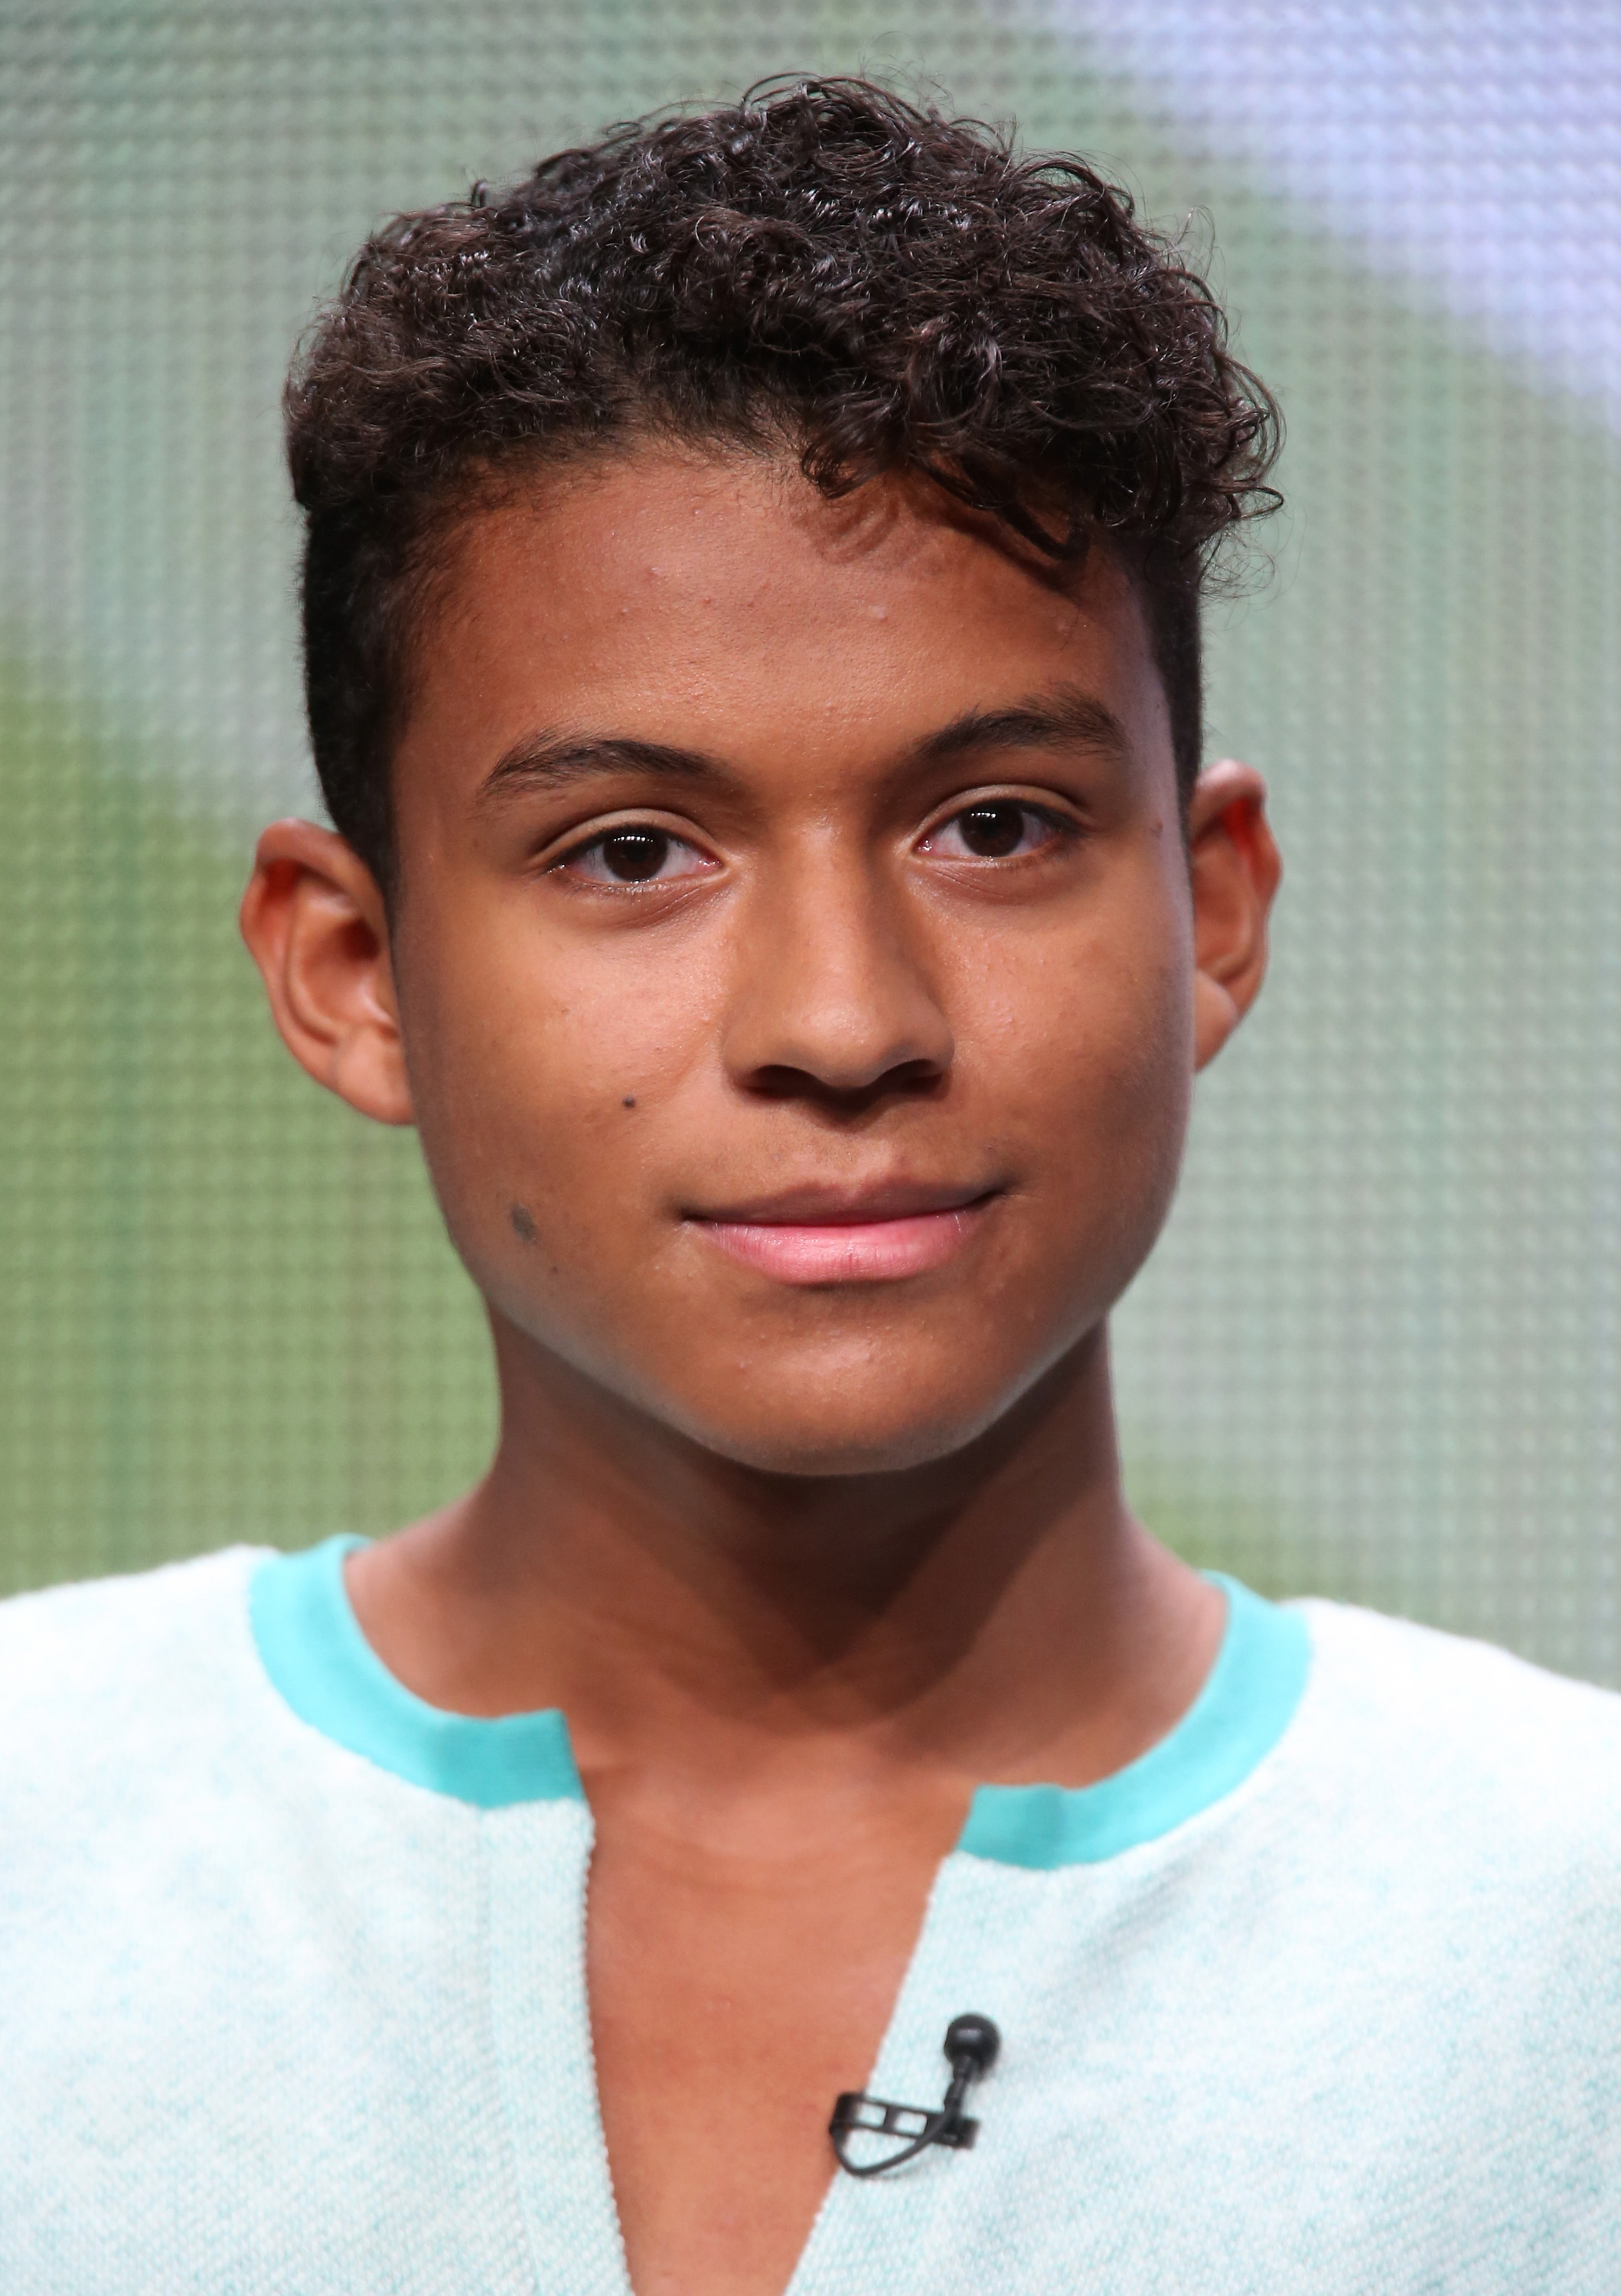 Jaafar Jackson as one of the panelists at "Living with the Jacksons" in California in 2014 | Source: Getty Images